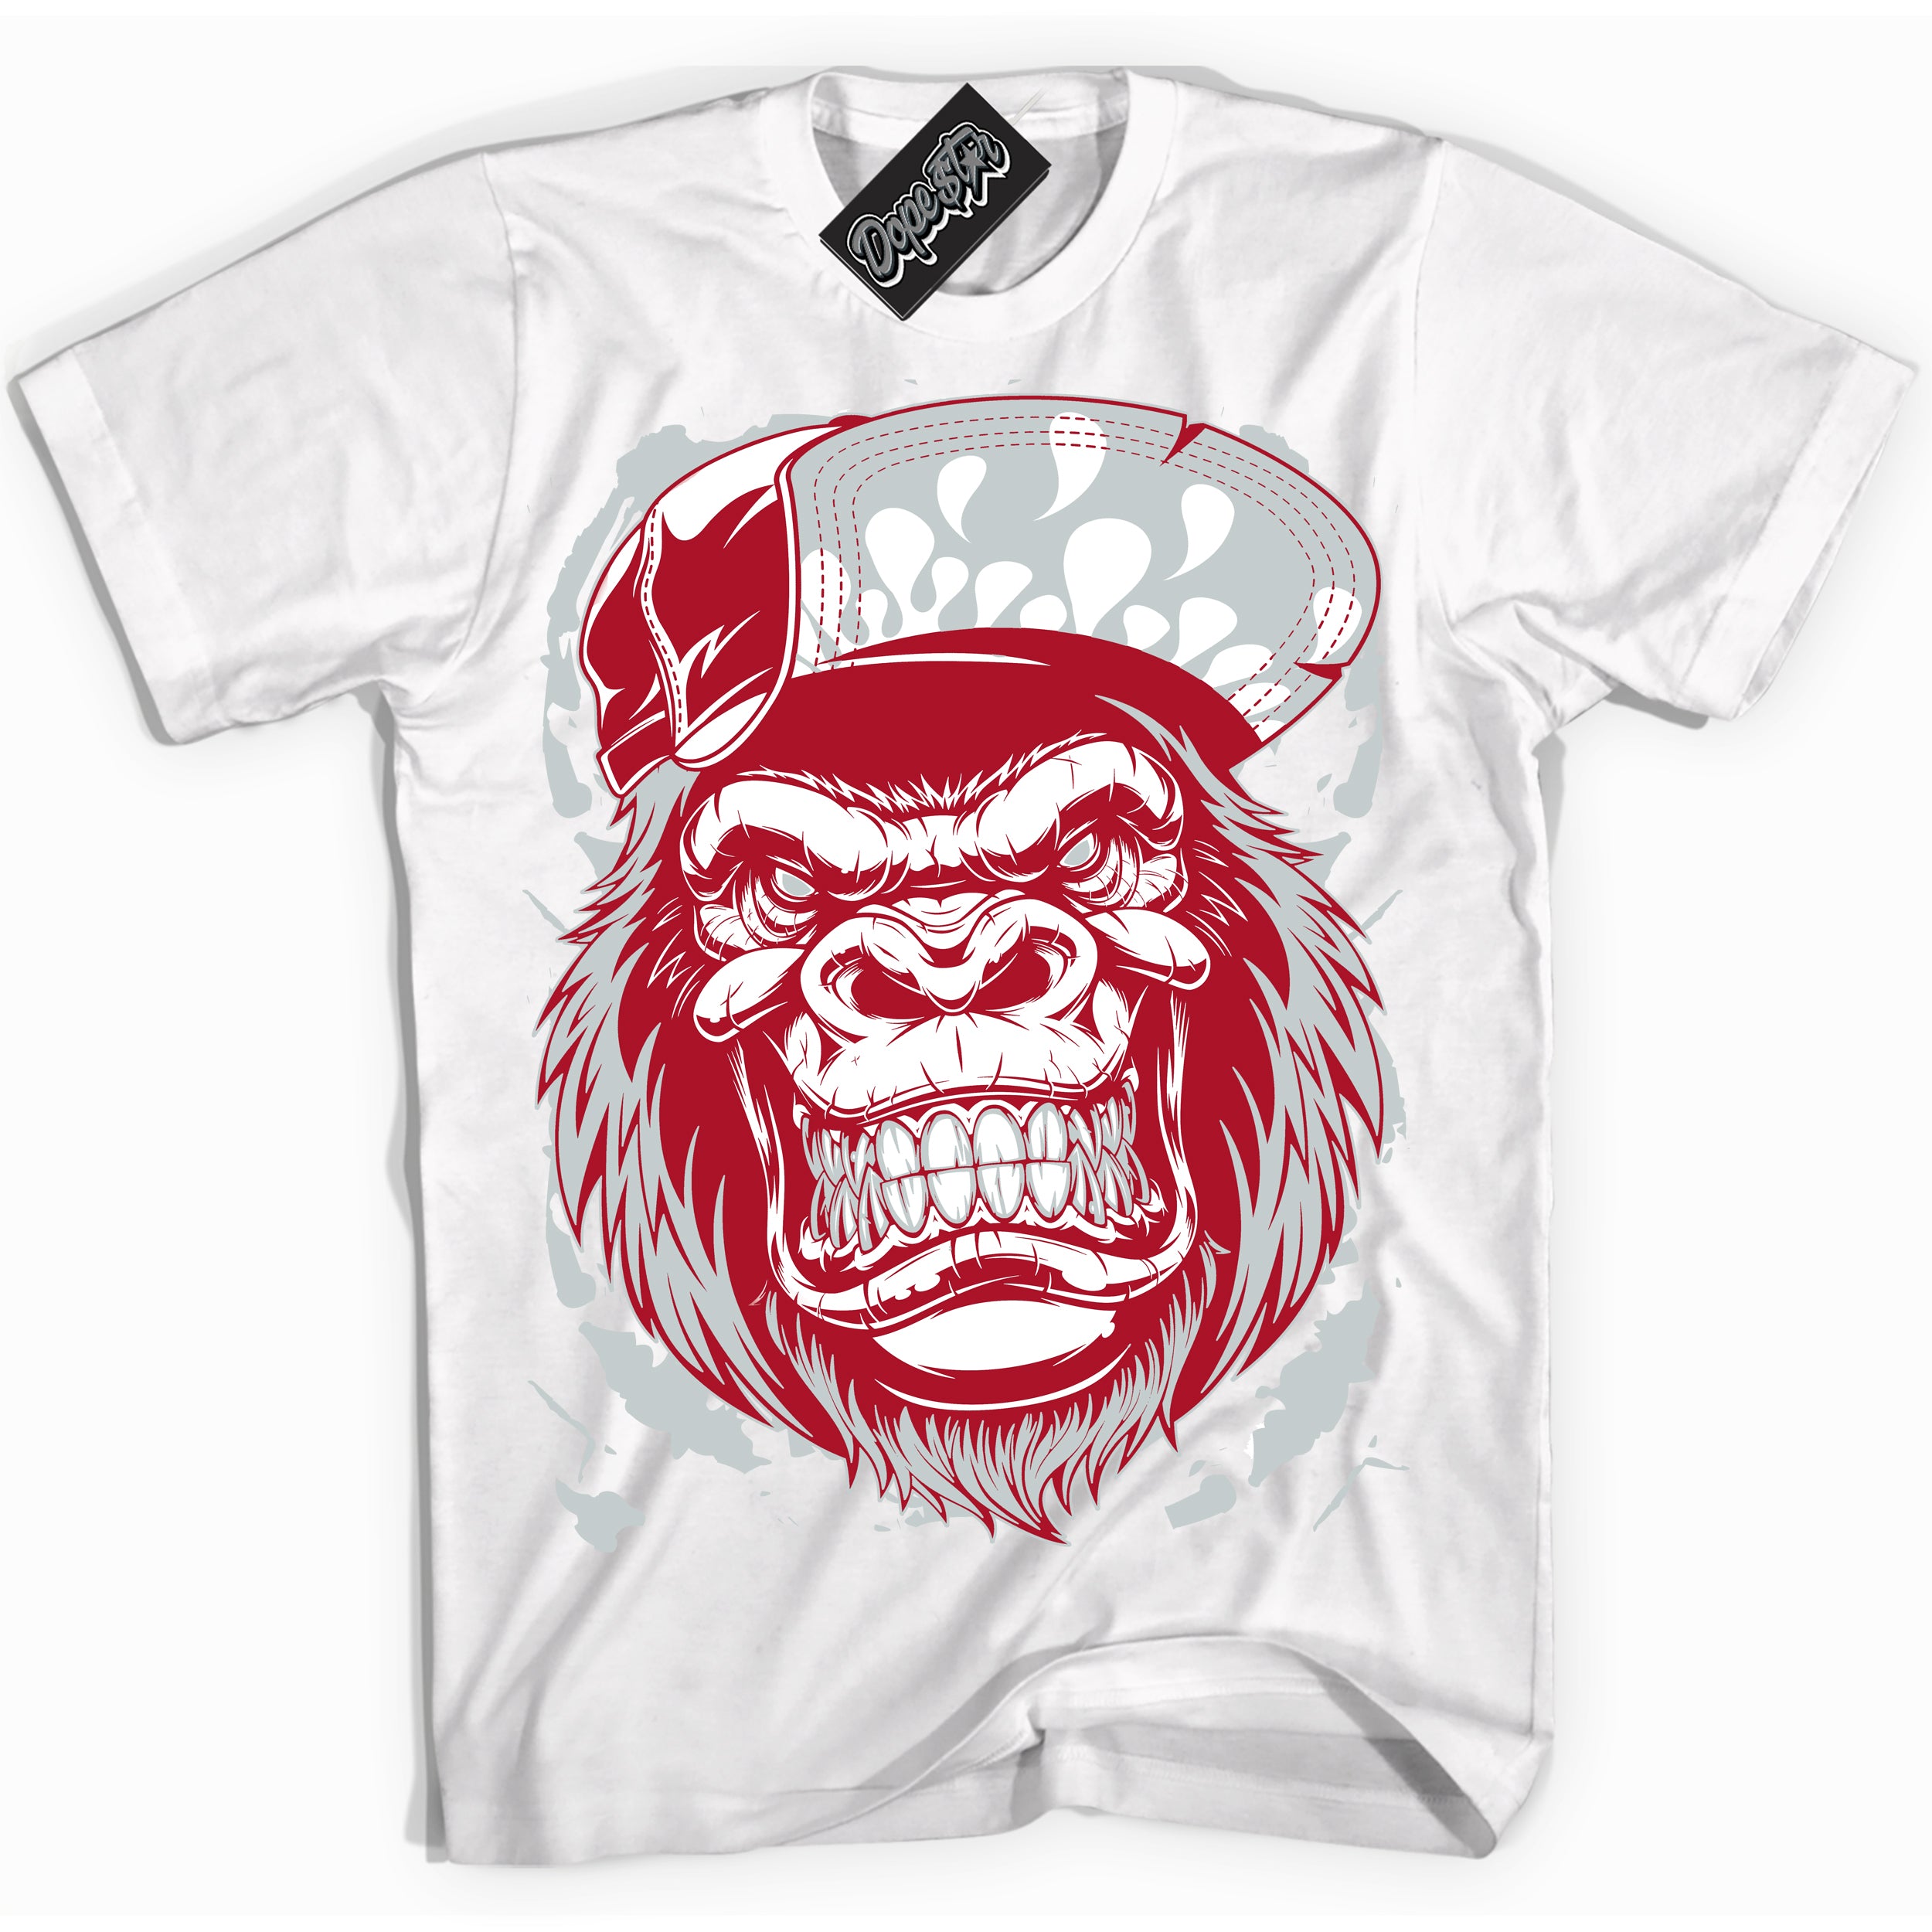 Cool White Shirt with “ Gorilla Beast” design that perfectly matches Reverse Ultraman Sneakers.